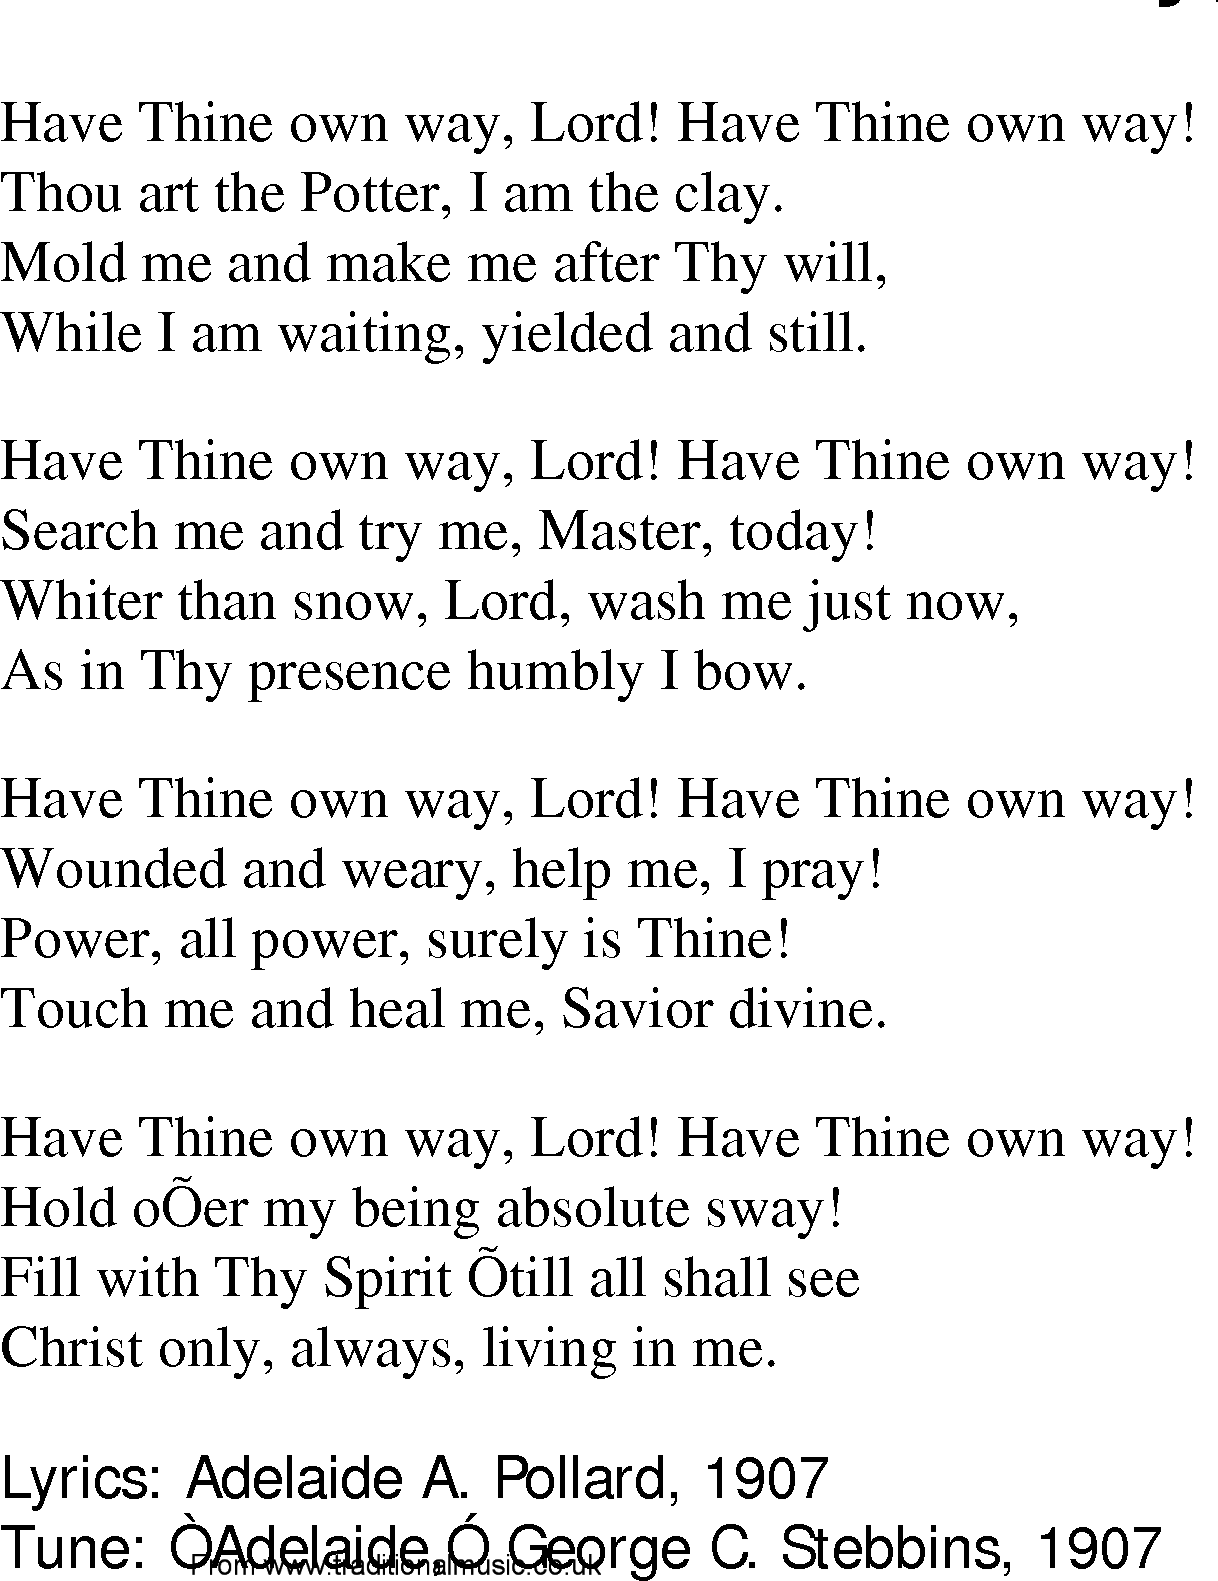 Gospel Song: have_thine_own_way_lord, lyrics and chords.